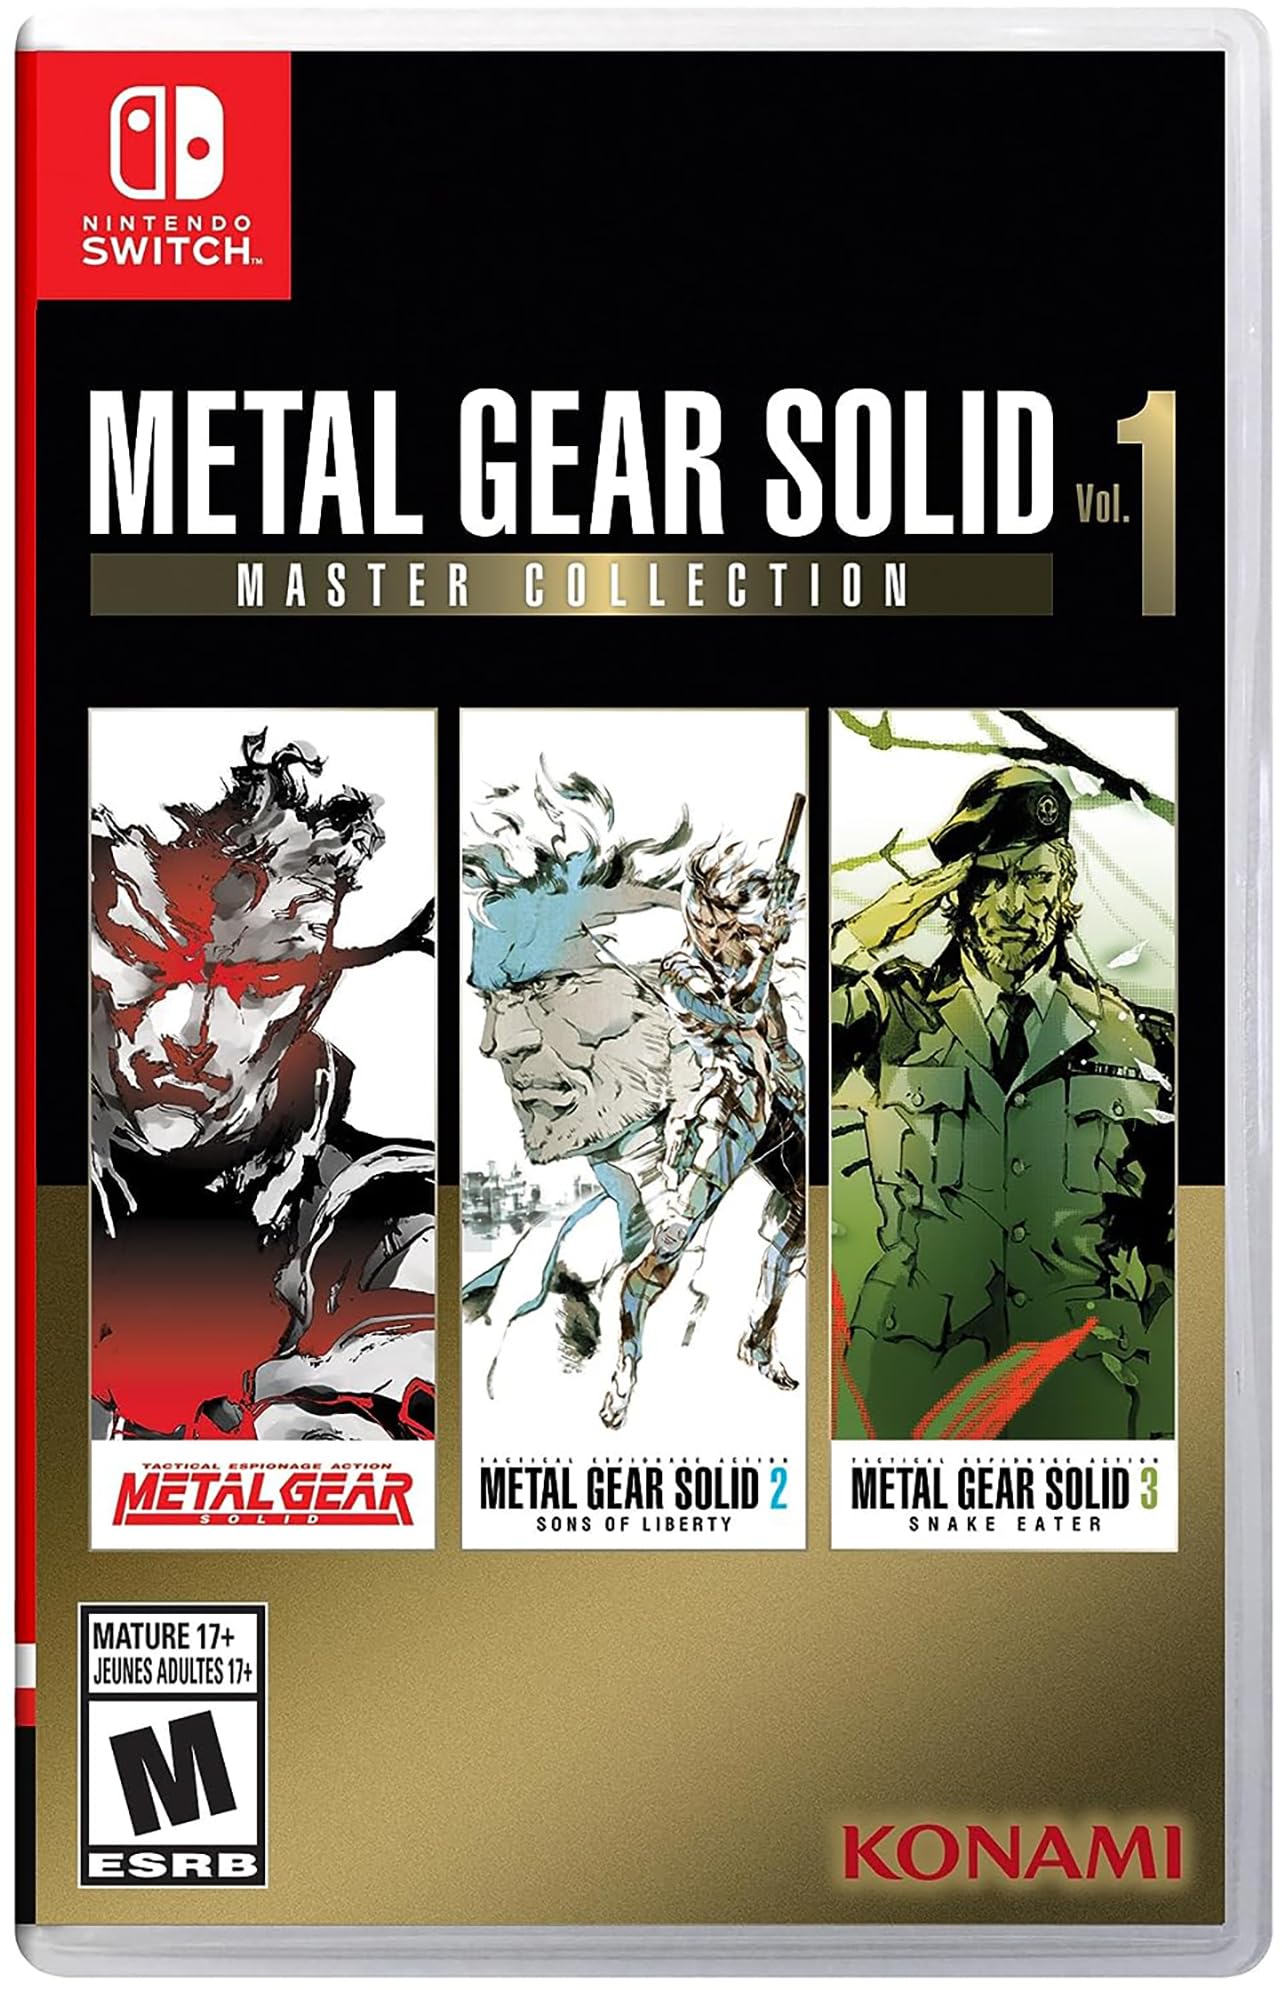 Metal Gear Solid: Master Collection Vol.1 (Nintendo Switch, Physical) $39.75 + Free Shipping